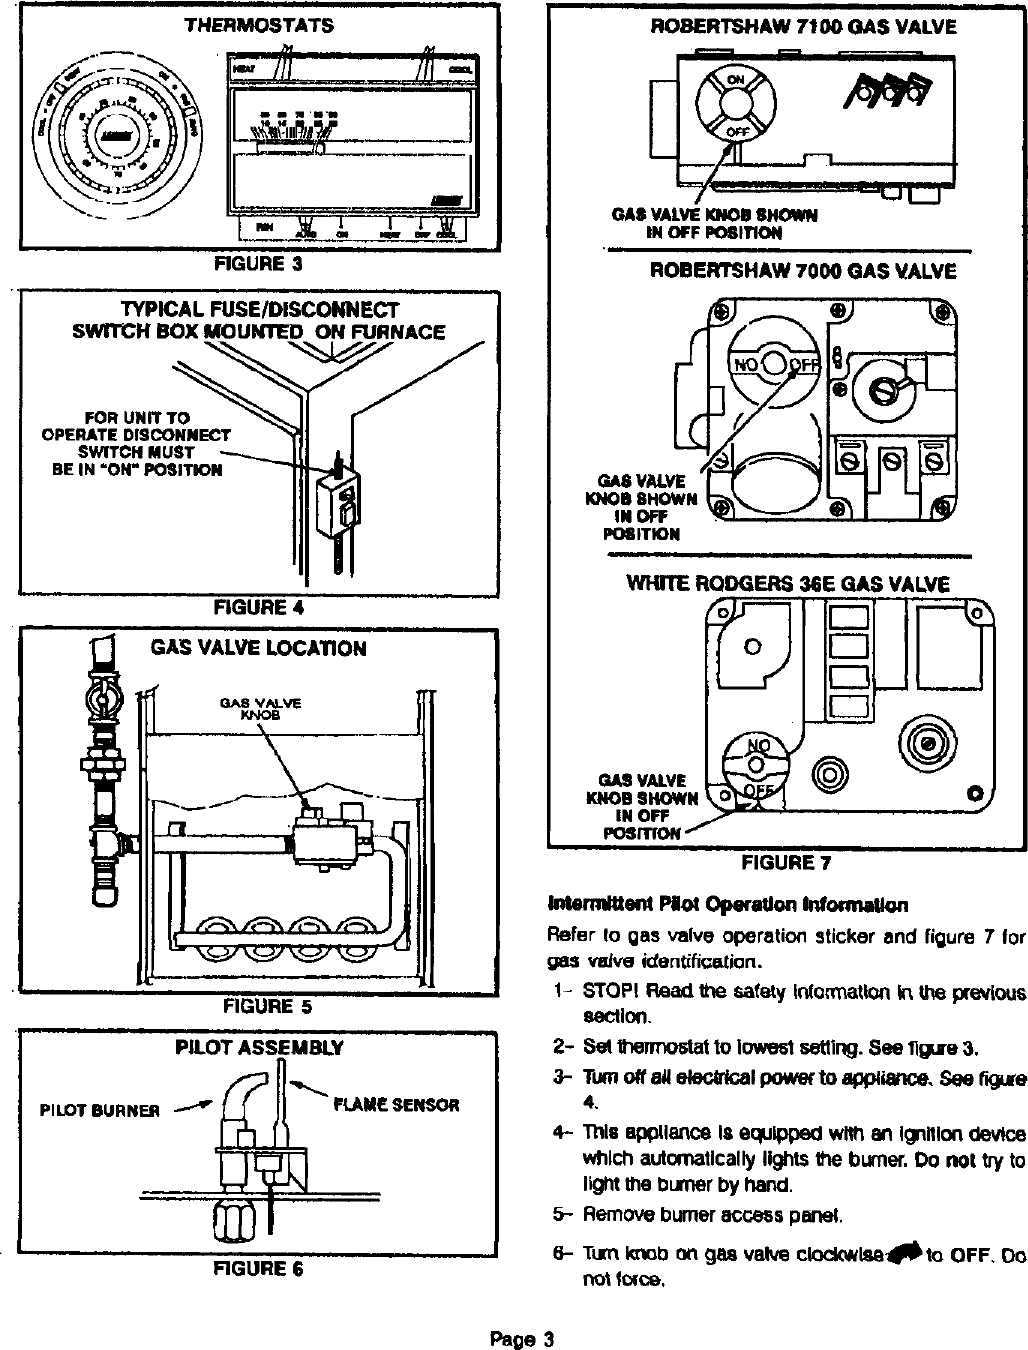 Page 4 of 8 - LENNOX  Furnace/Heater, Gas Manual L0403509